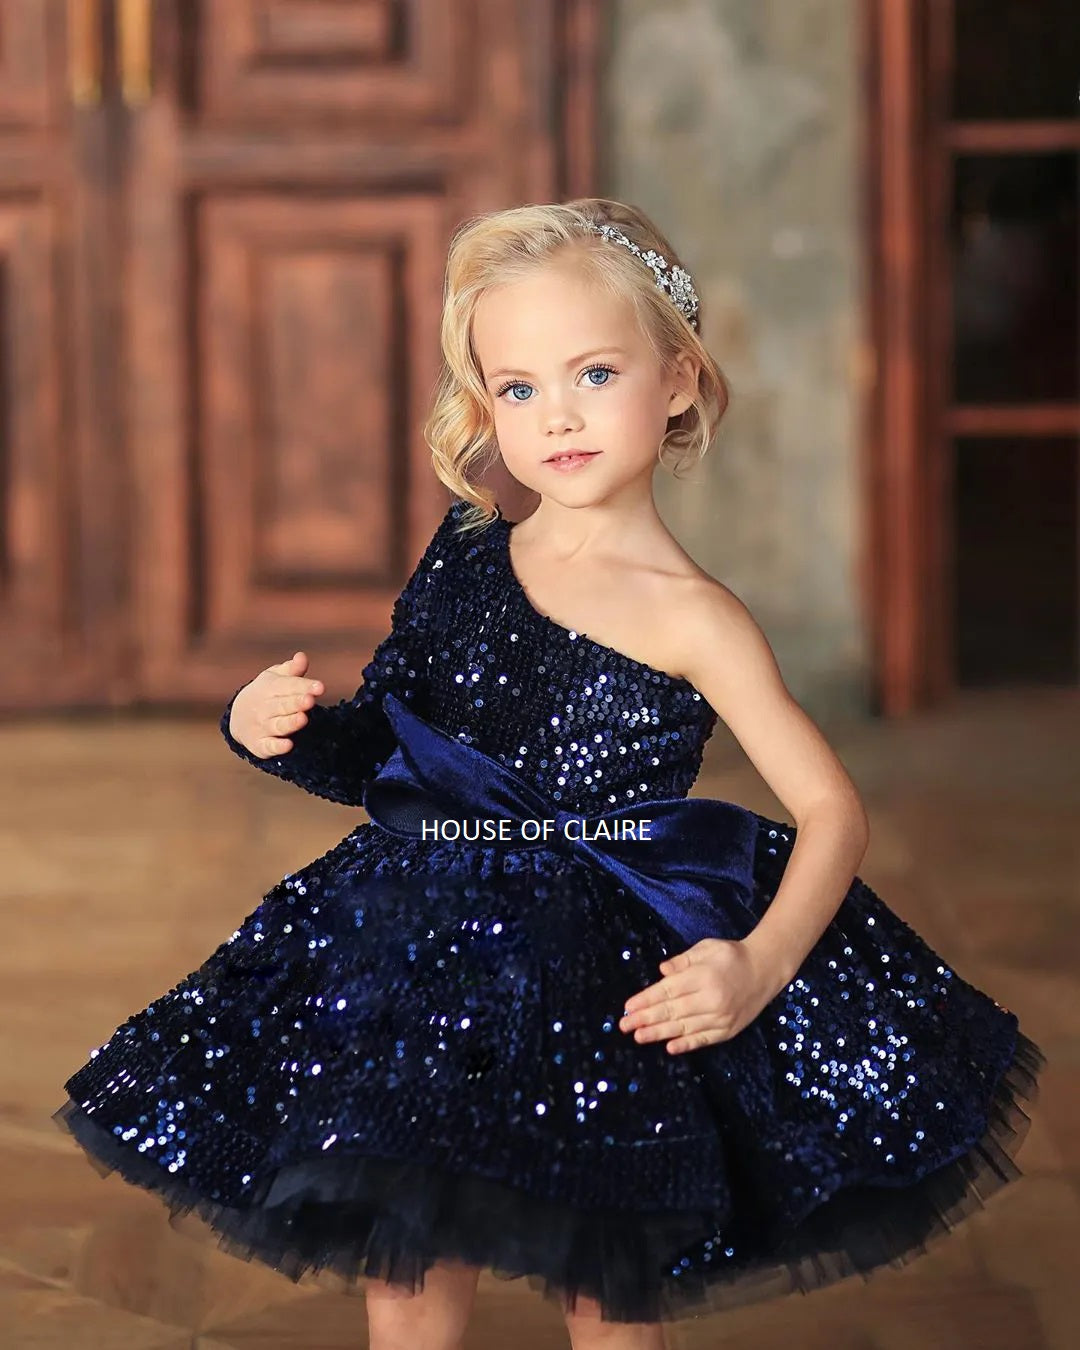 www.houseofclaire,com House of Claire Party wear Dresses for baby girls Childrens Party wear Best seller Ball Gown Mermaid Frozen Dress Baby Stores Near Me in Bangalore India Luxury Dresses for Kids Online India